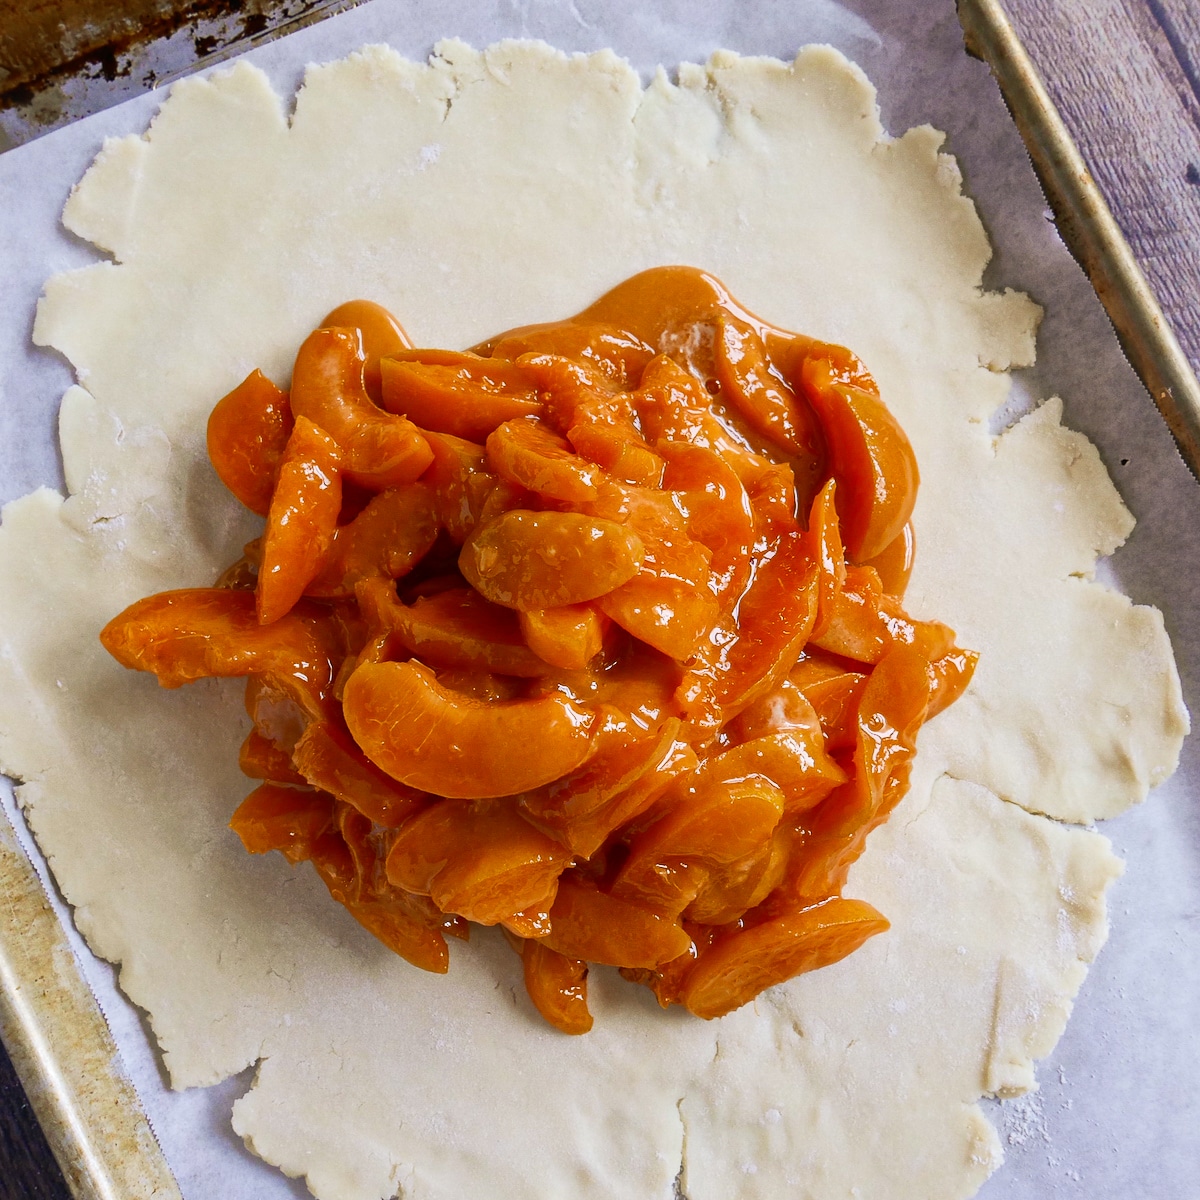 Apricot filling arranged on rolled out dough.